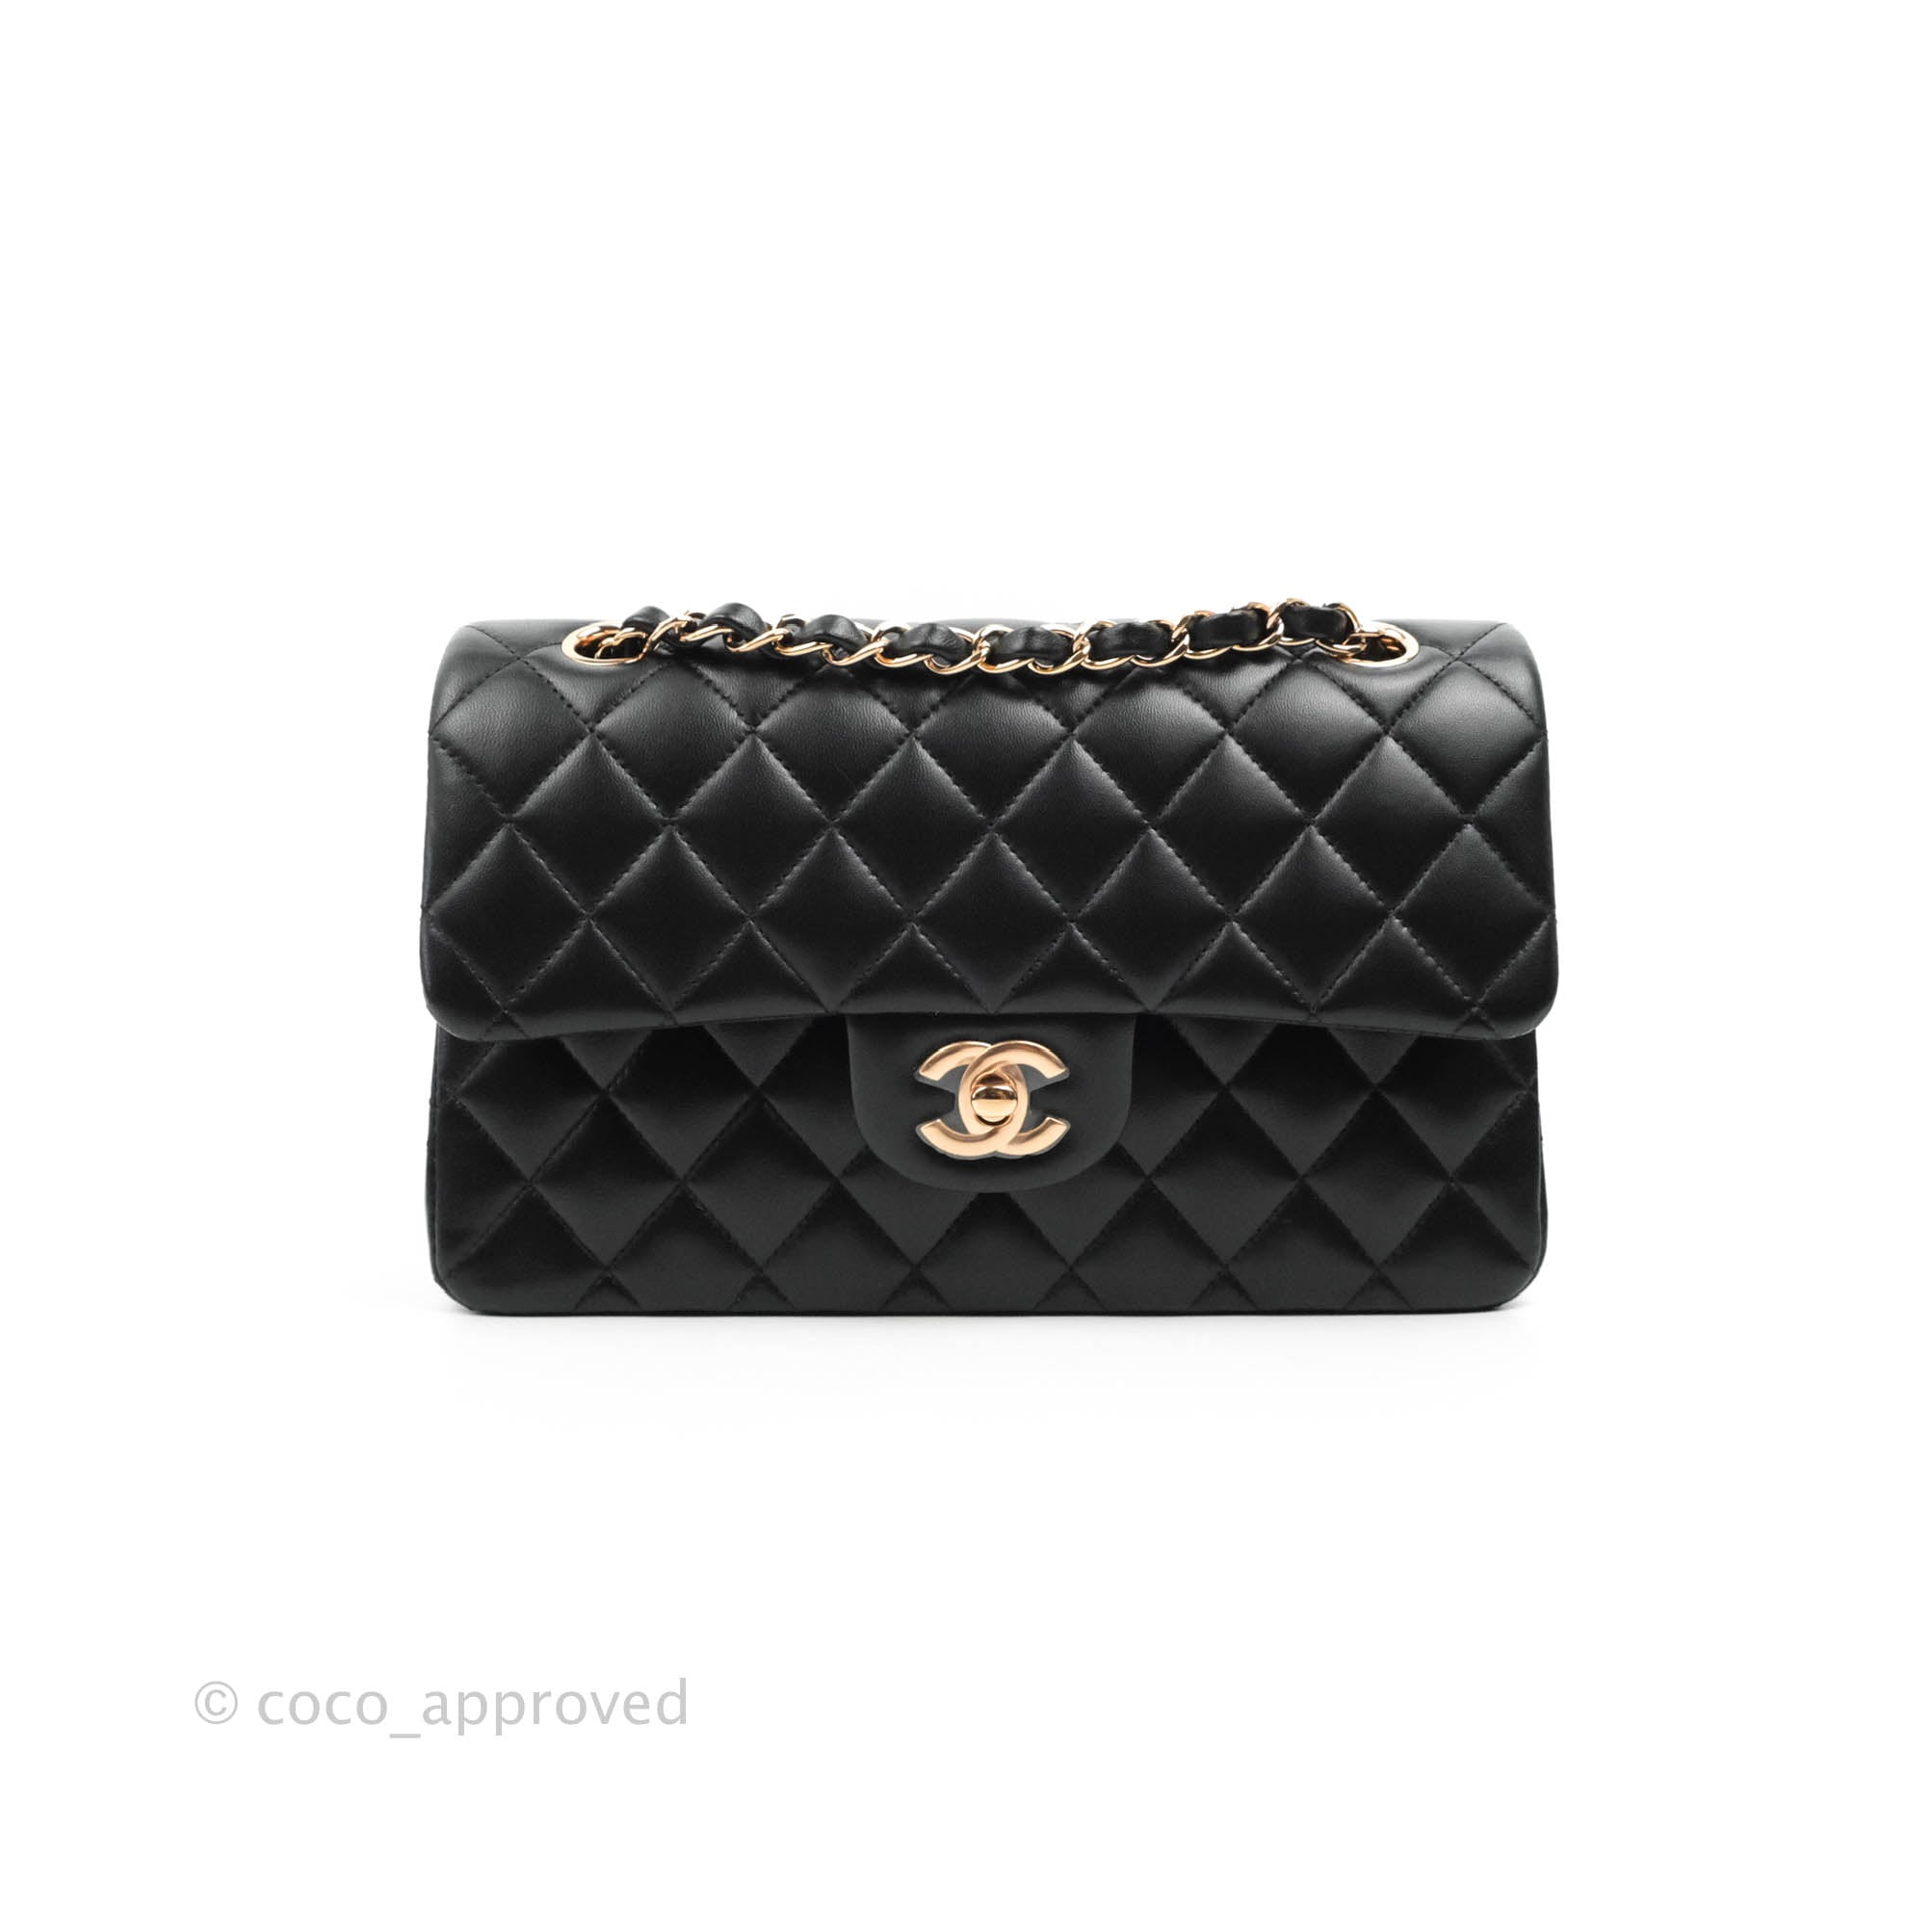 CHANEL Paris, made in France Classic single-flap bag in …